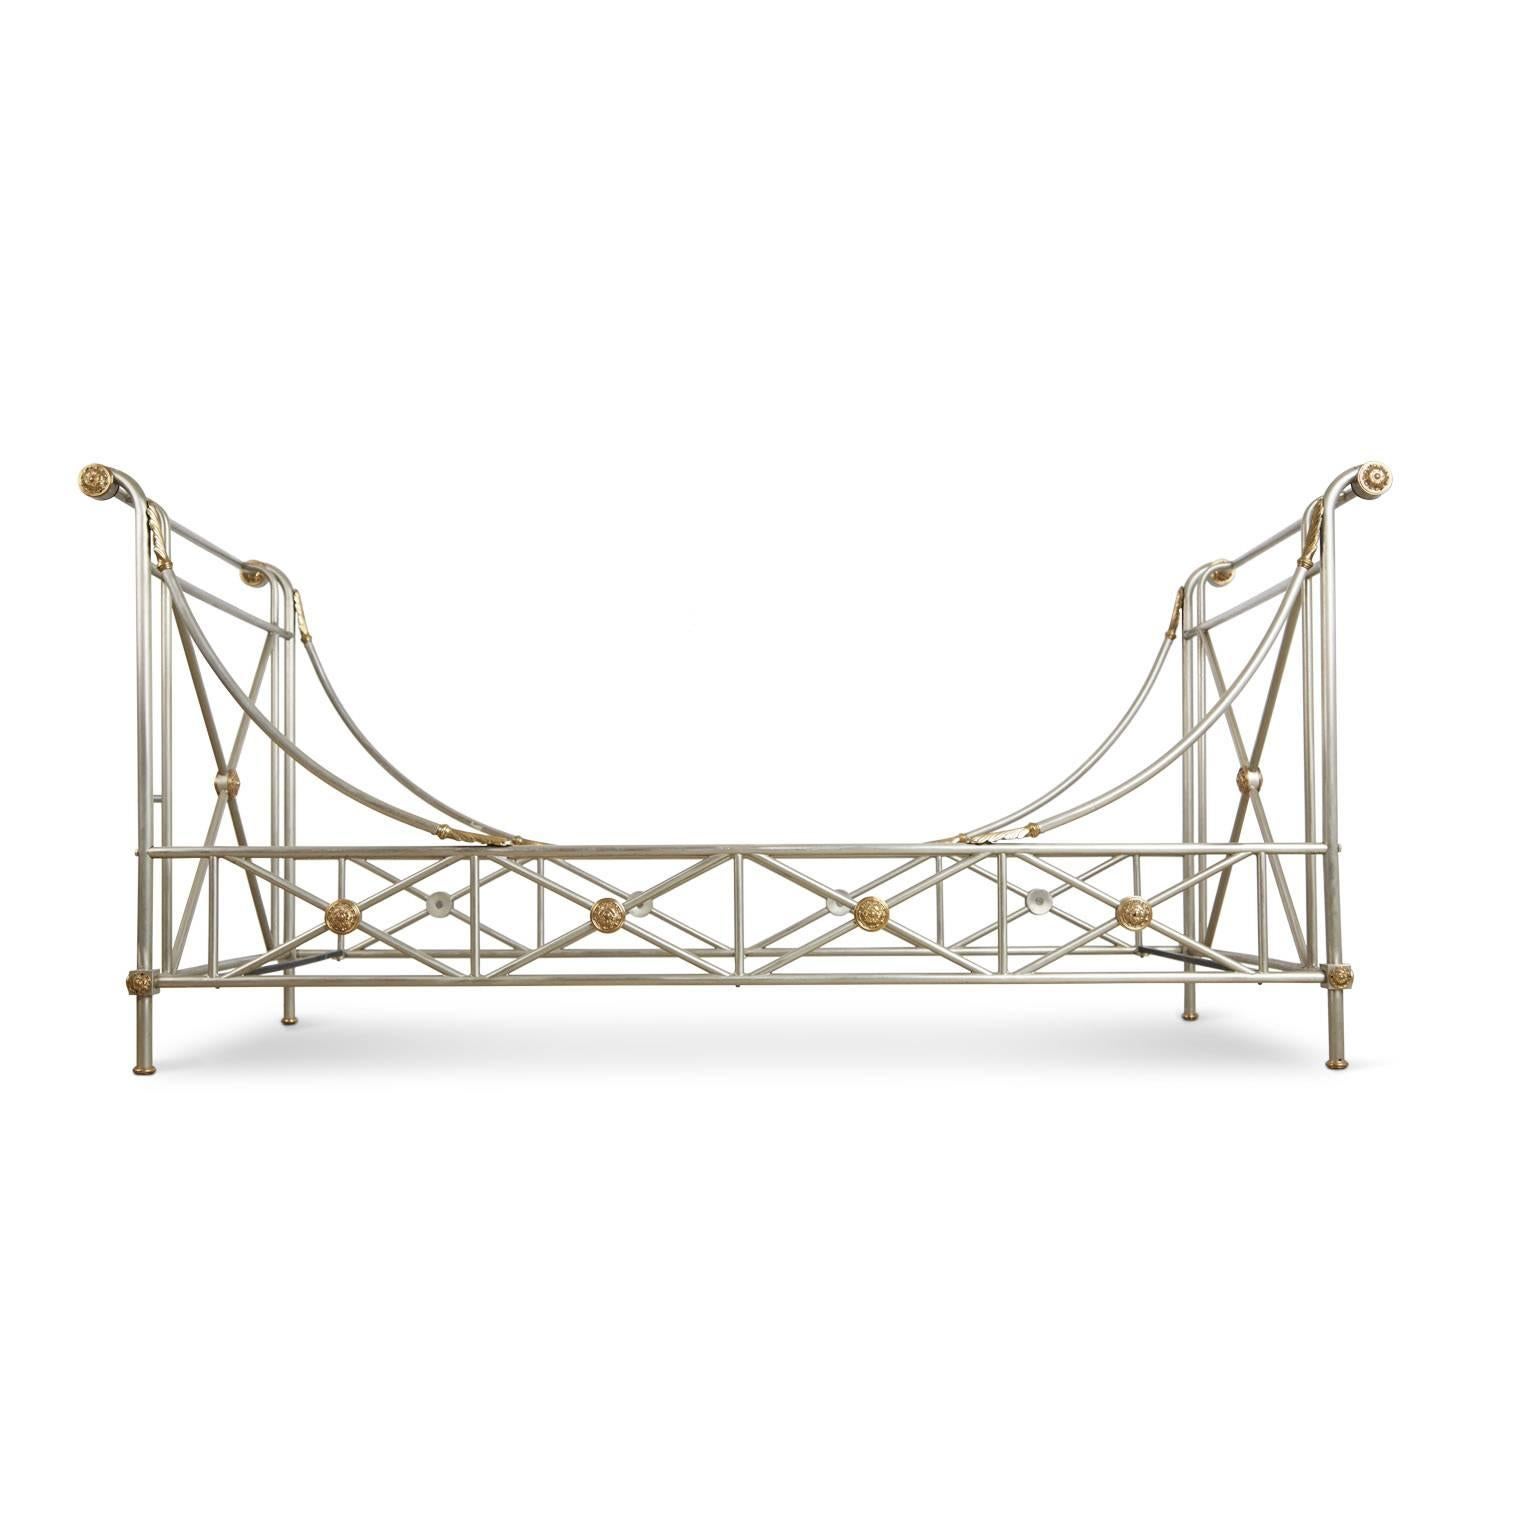 Gleaming Maison Jansen brushed nickel daybed with beautiful brass accents. Featuring an elegantly constructed frame with swooping side rails and elevated identical head and foot boards and punctuated with brass medallions as well as arched acanthus